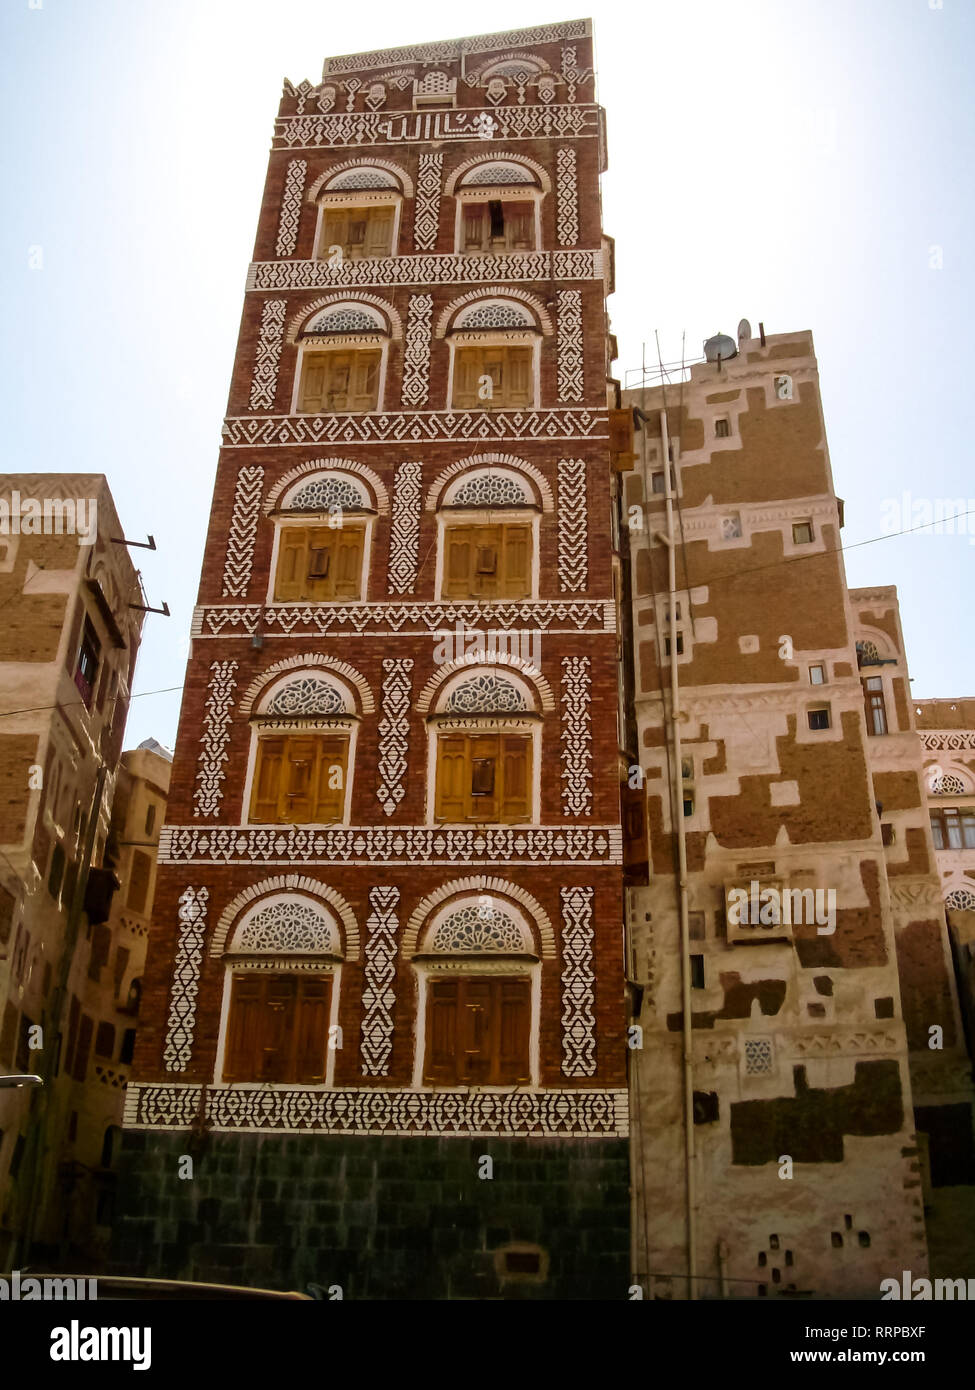 city-of-sanaa-streets-and-buildings-of-the-city-in-yemen-sights-and-architecture-of-the-middle-east-RRPBXF.jpg